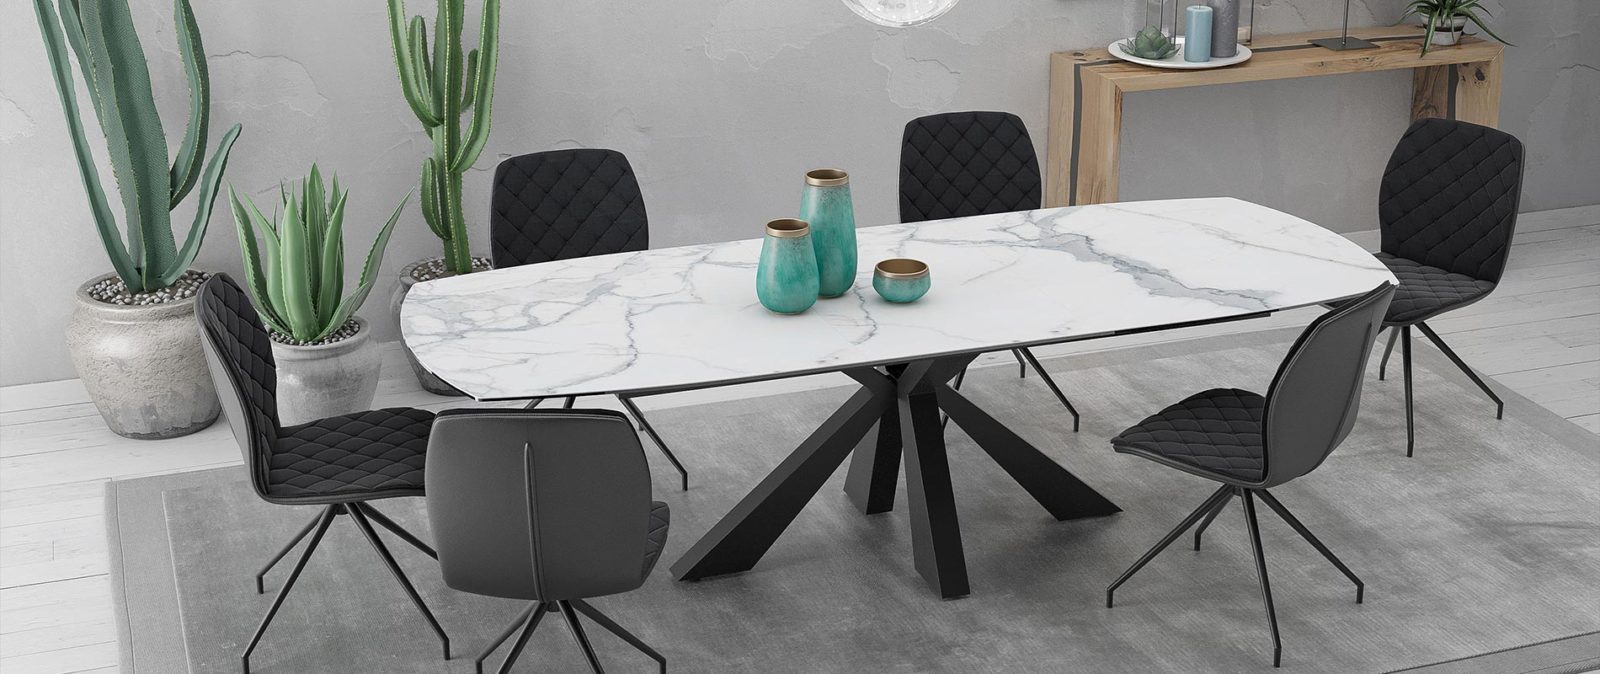 White marble ceramic dining table